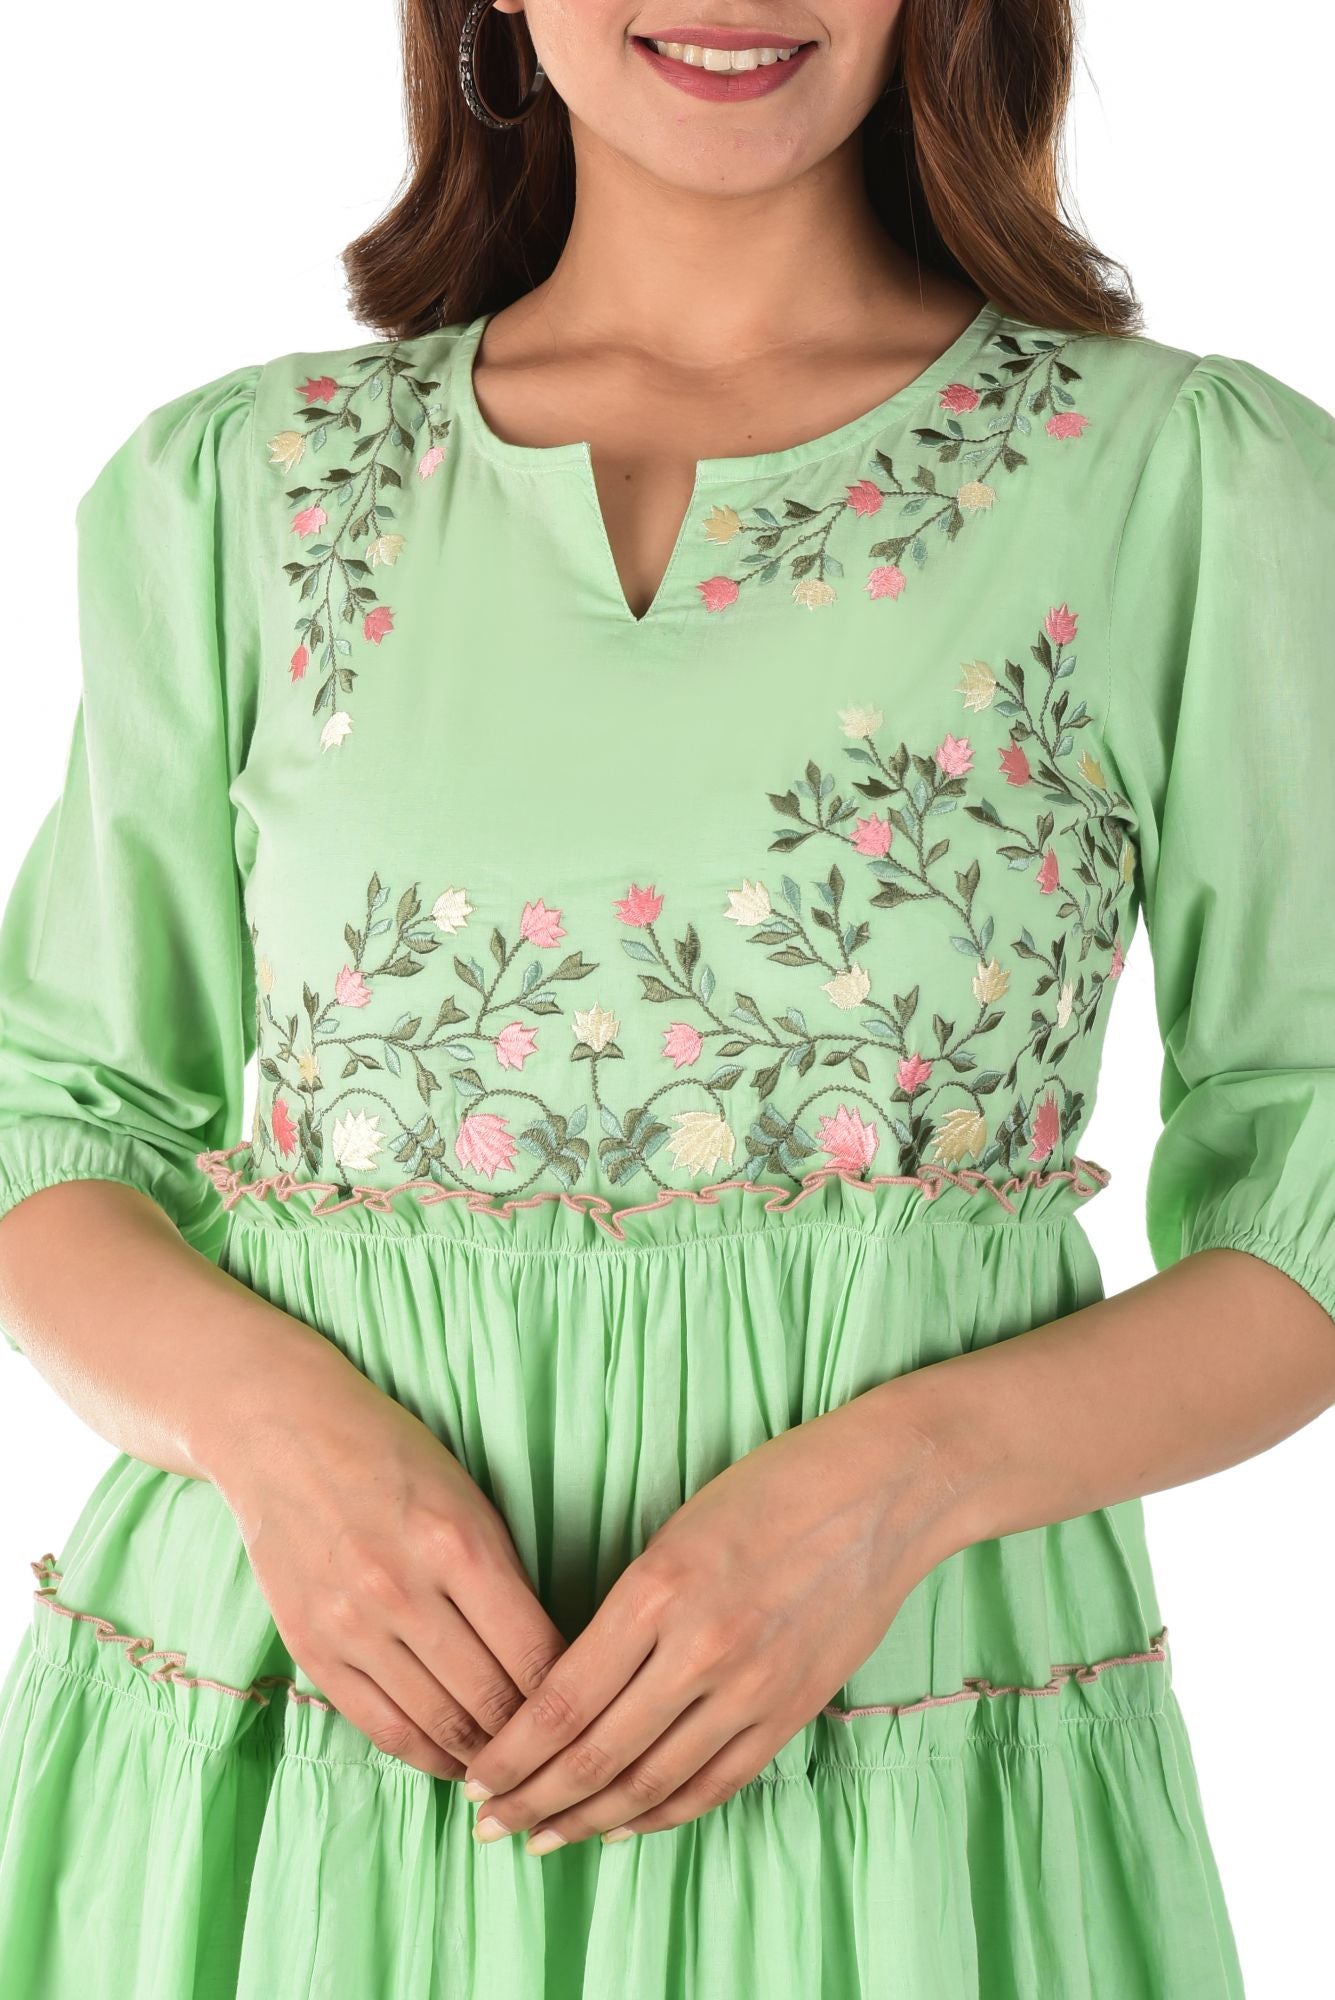 Pista Green Embroidered Dress